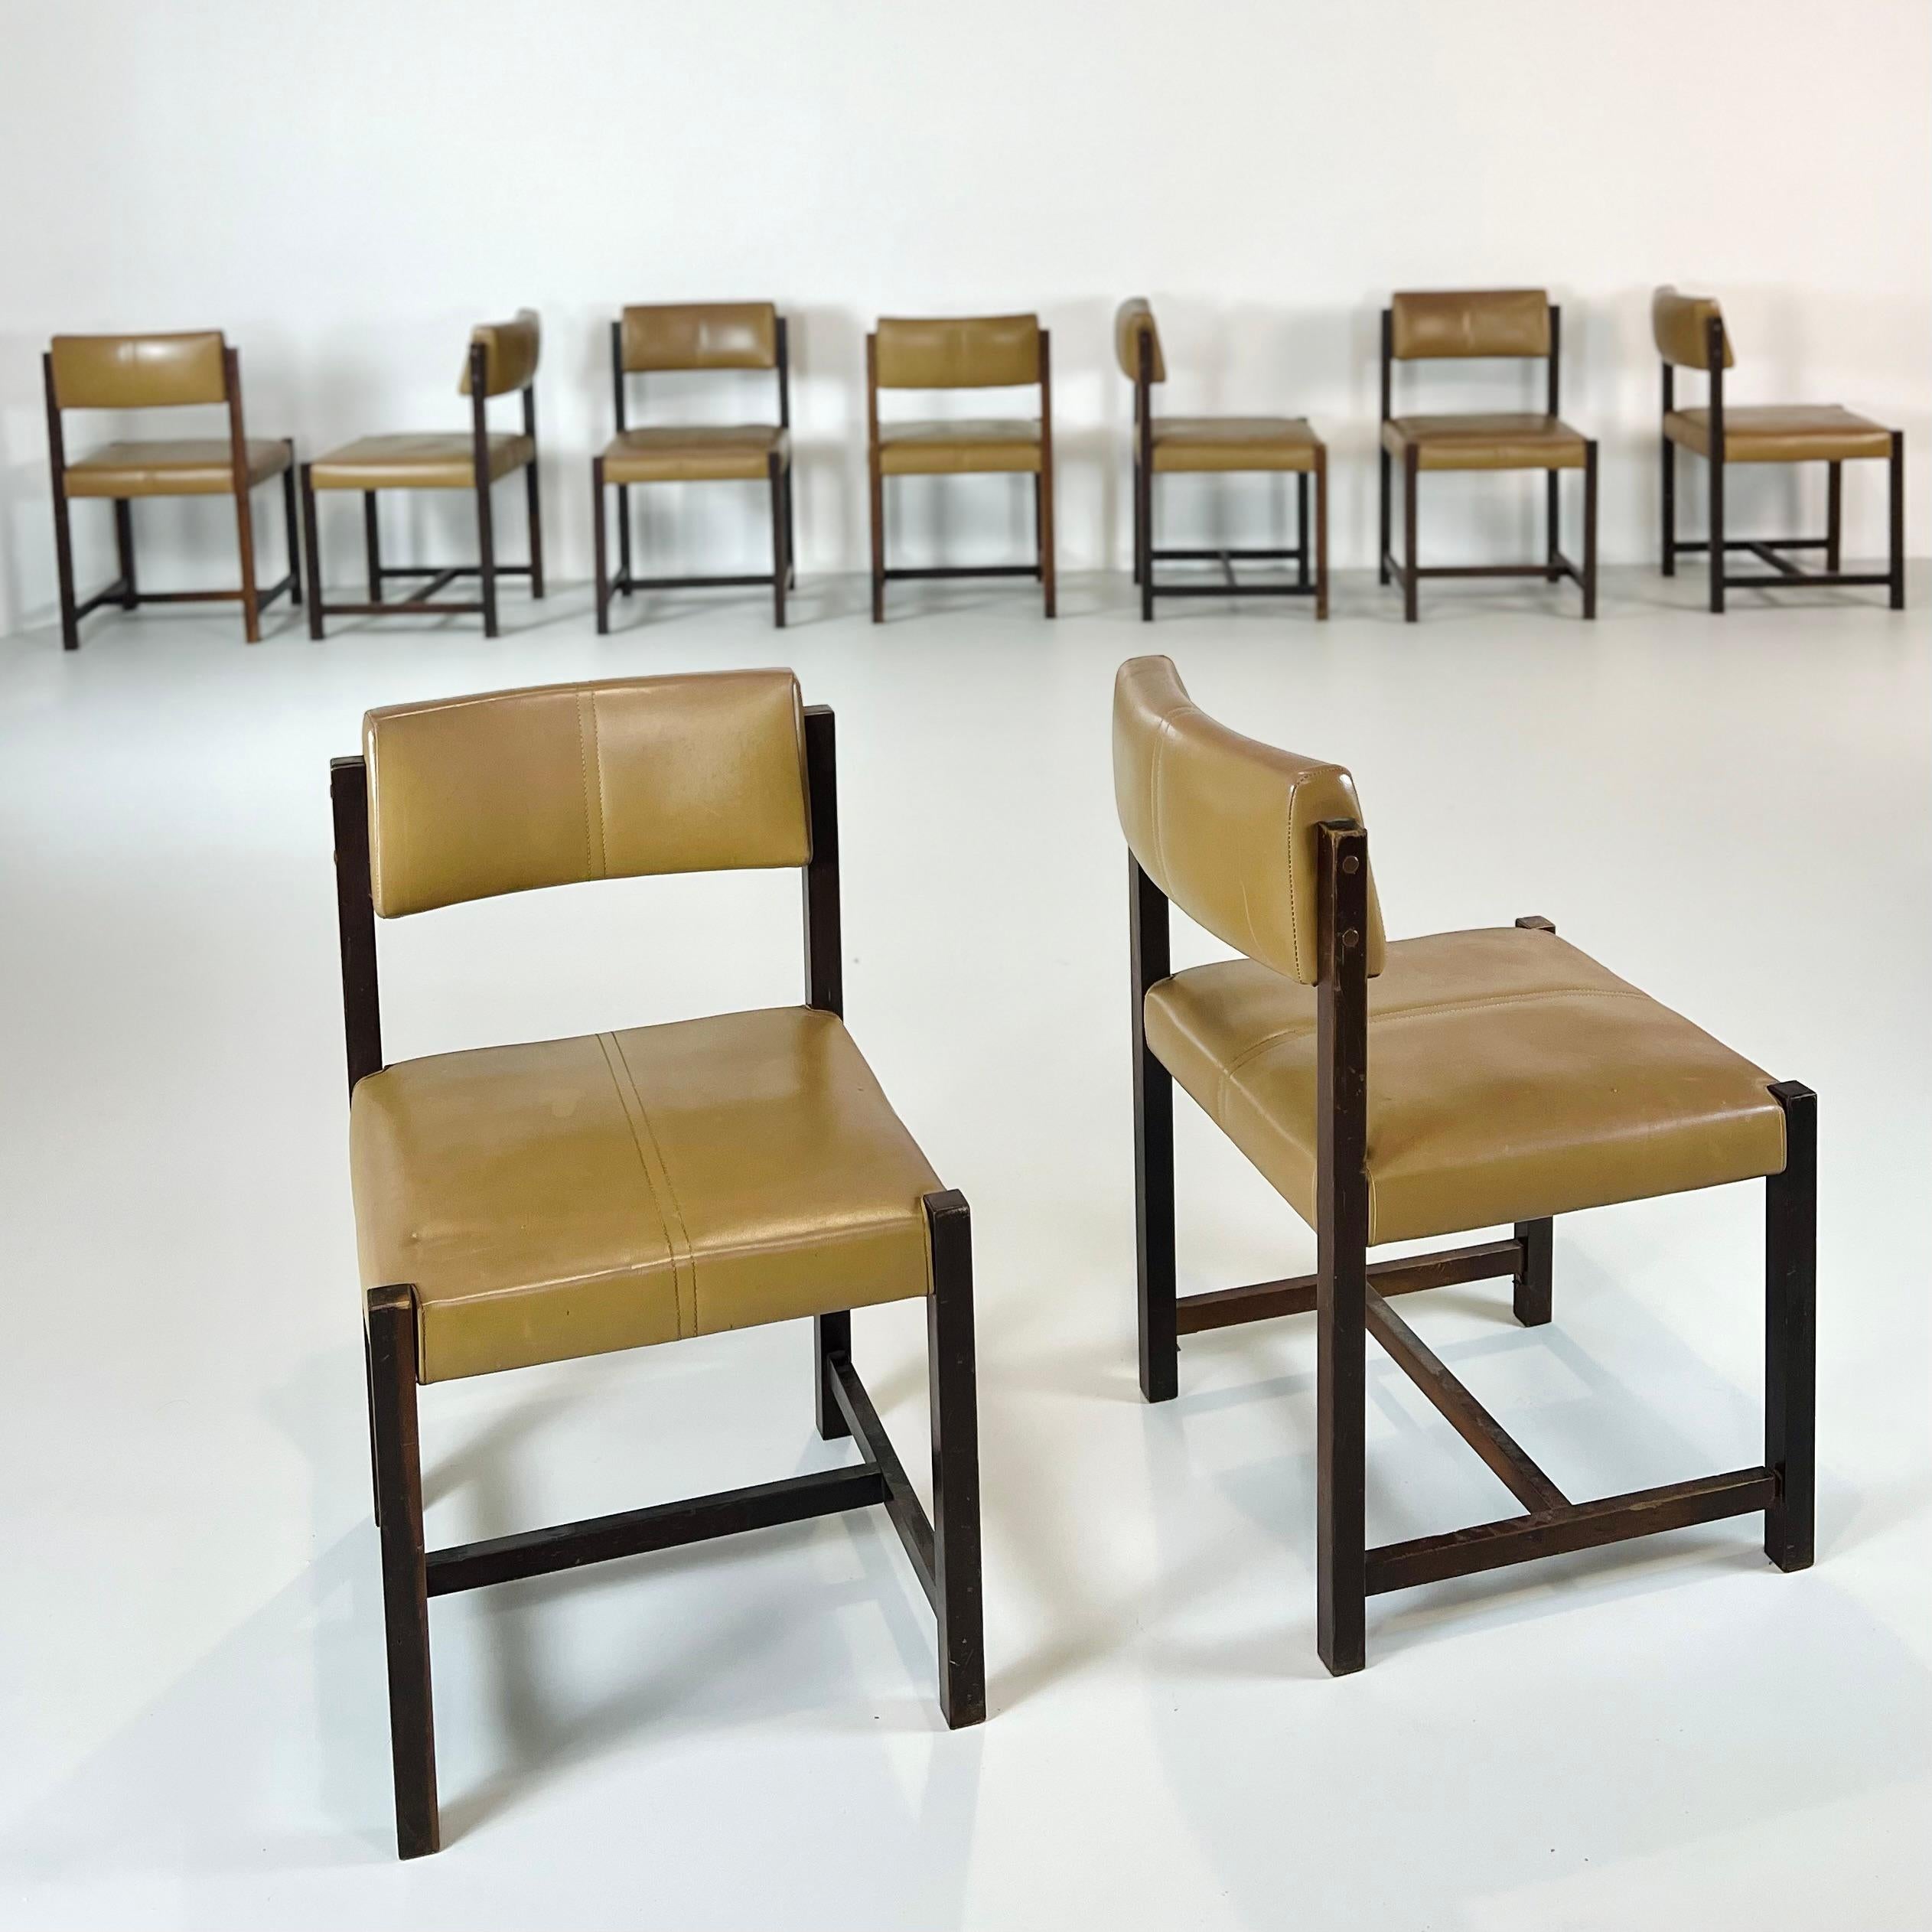 Set of 12 dinning room chairs 'Del Rey' by Jorge Zalszupin, Brazil, 1960.

The restoration process only needed refinishing, which was done by our team at the finest details and preserving the originality from that period.

The restoration